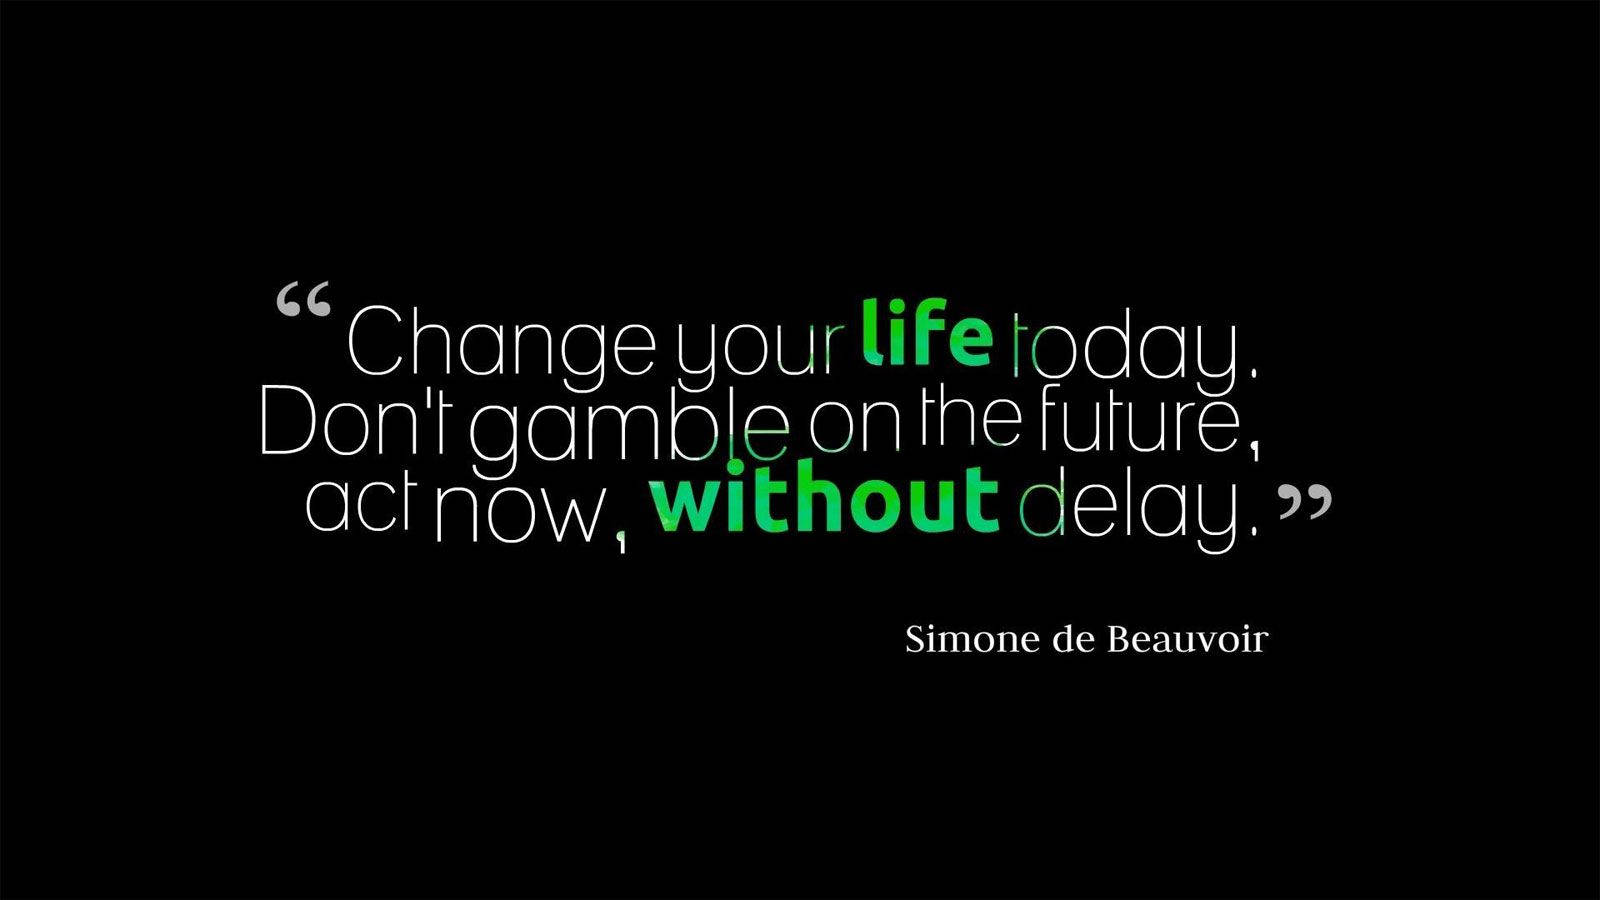 Motivational Quote About Change